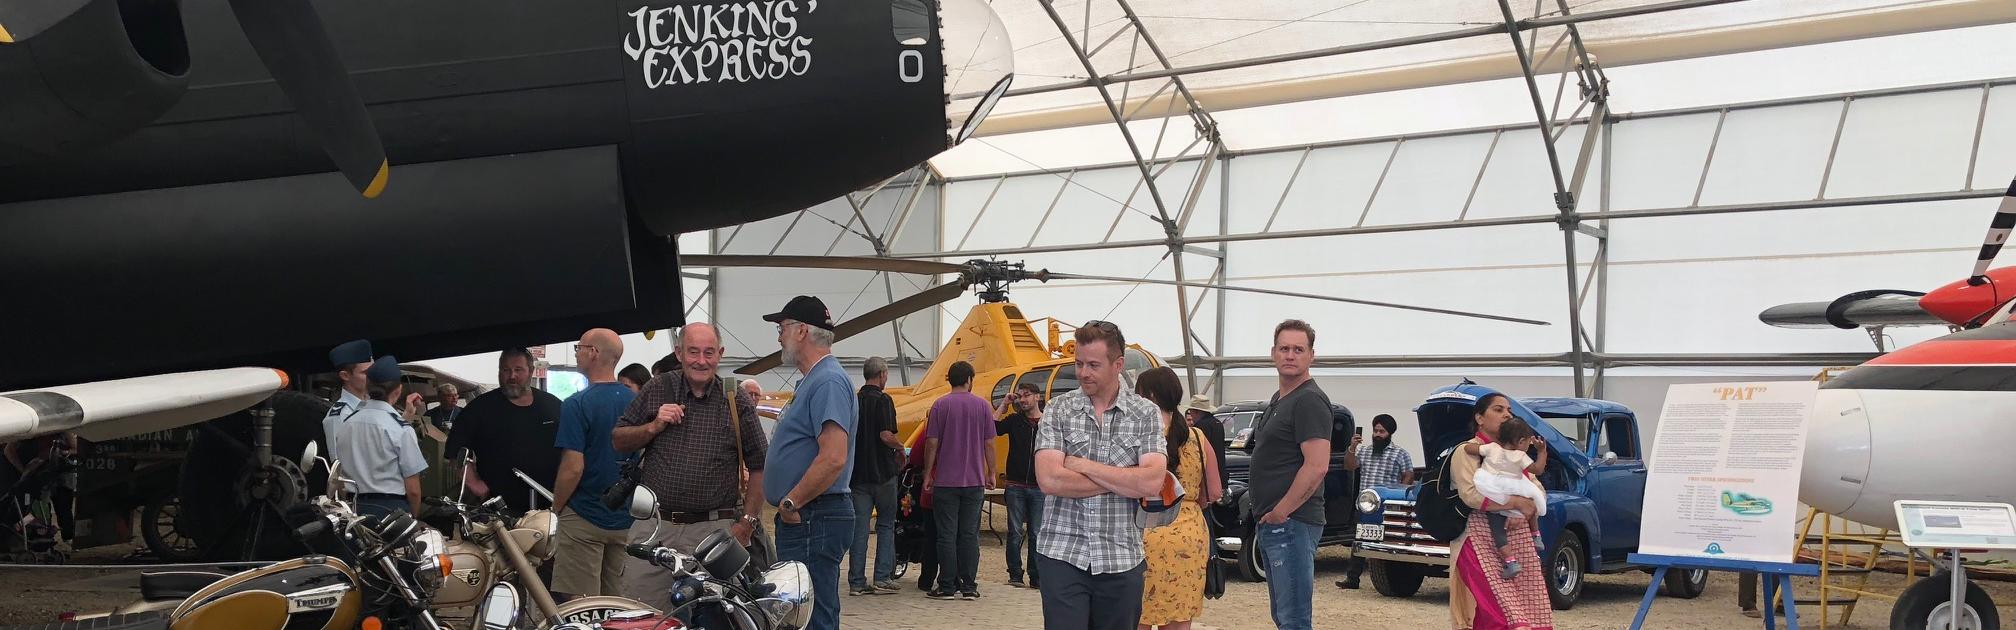 wings and wheels 2018 crowd shot